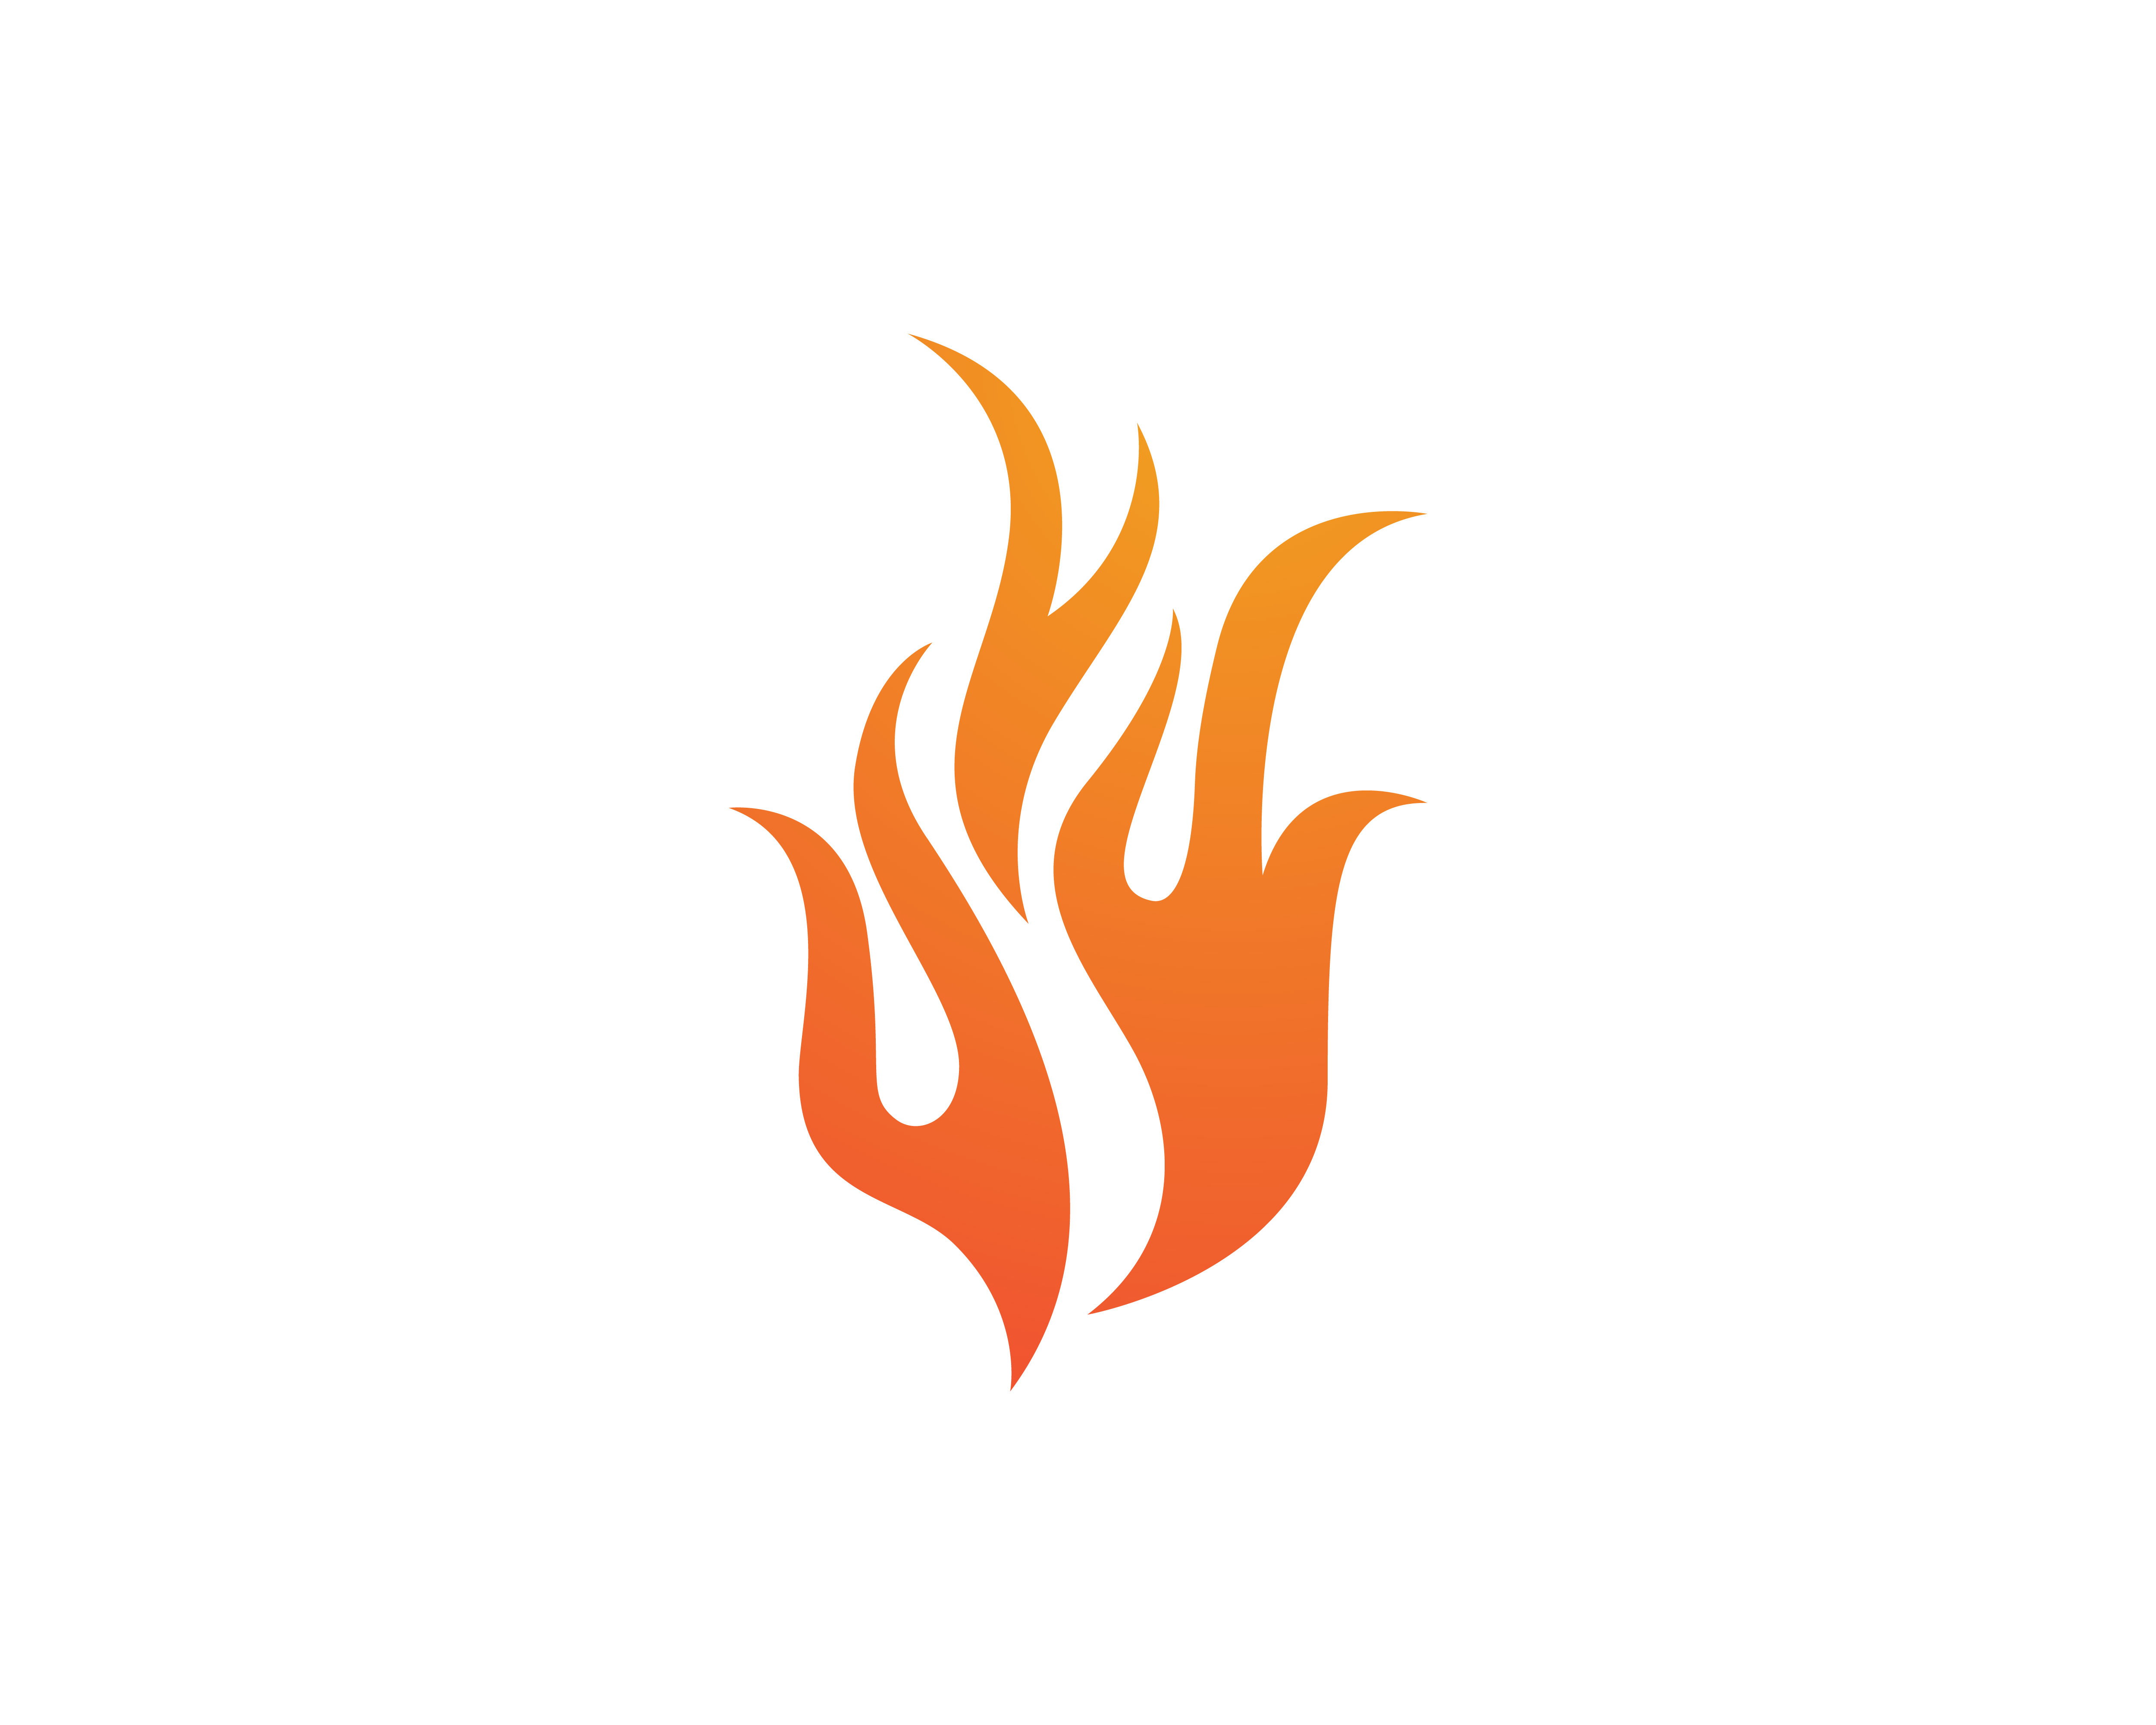 Fire vector icon logo template 585583 - Download Free Vectors, Clipart